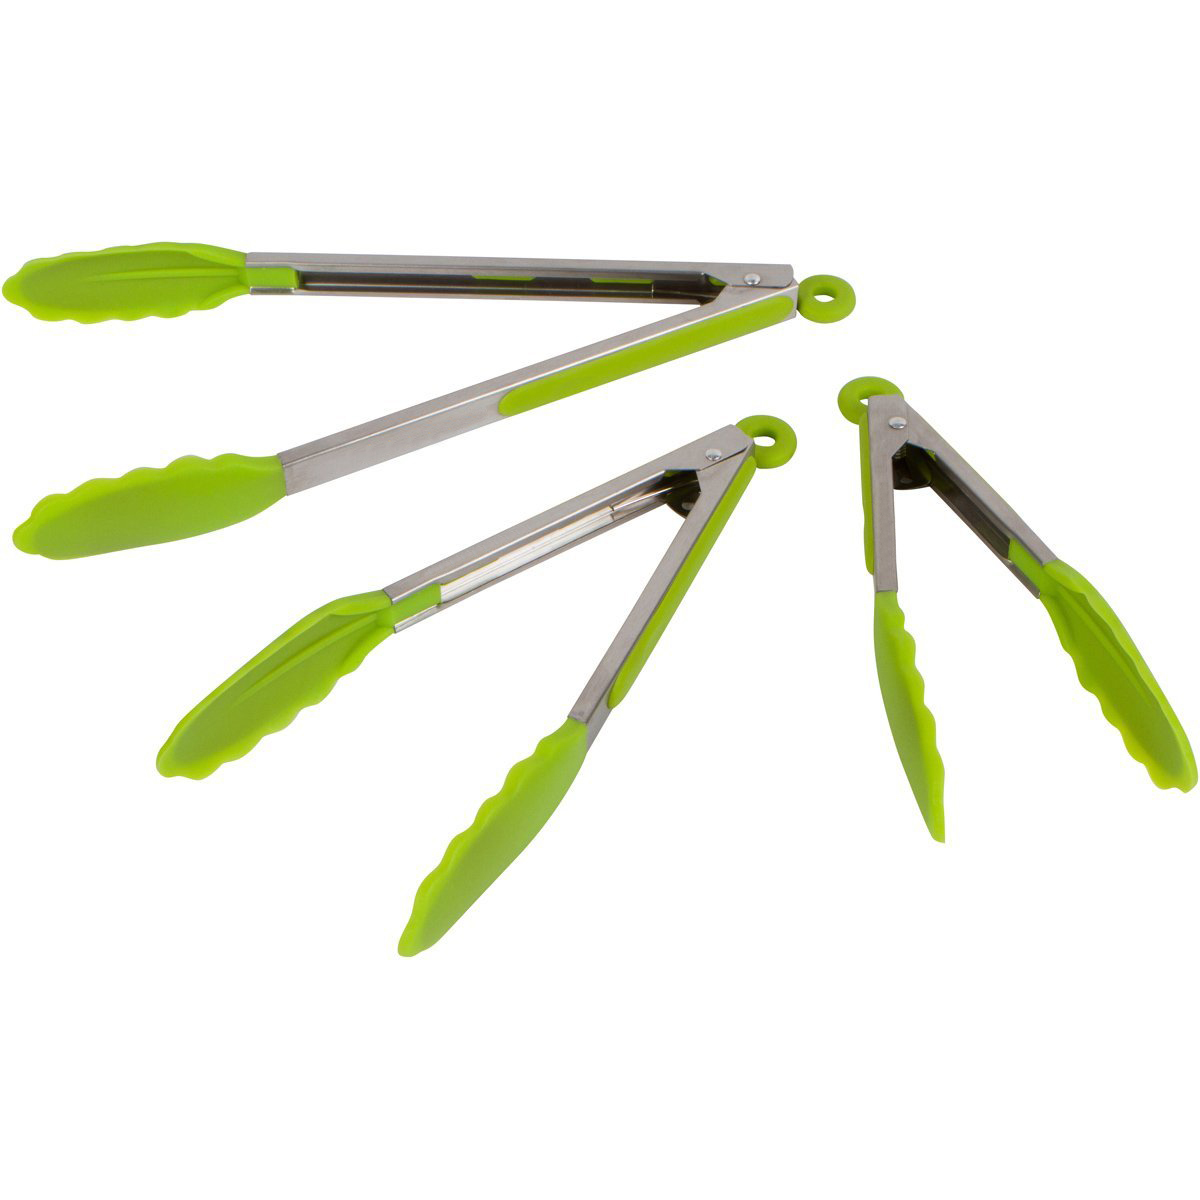 Wholesale Customized color Kitchen Tongs with Silicone Tips – Set Of 3  Locking Tongs for Cooking -7,9,12 factory and suppliers